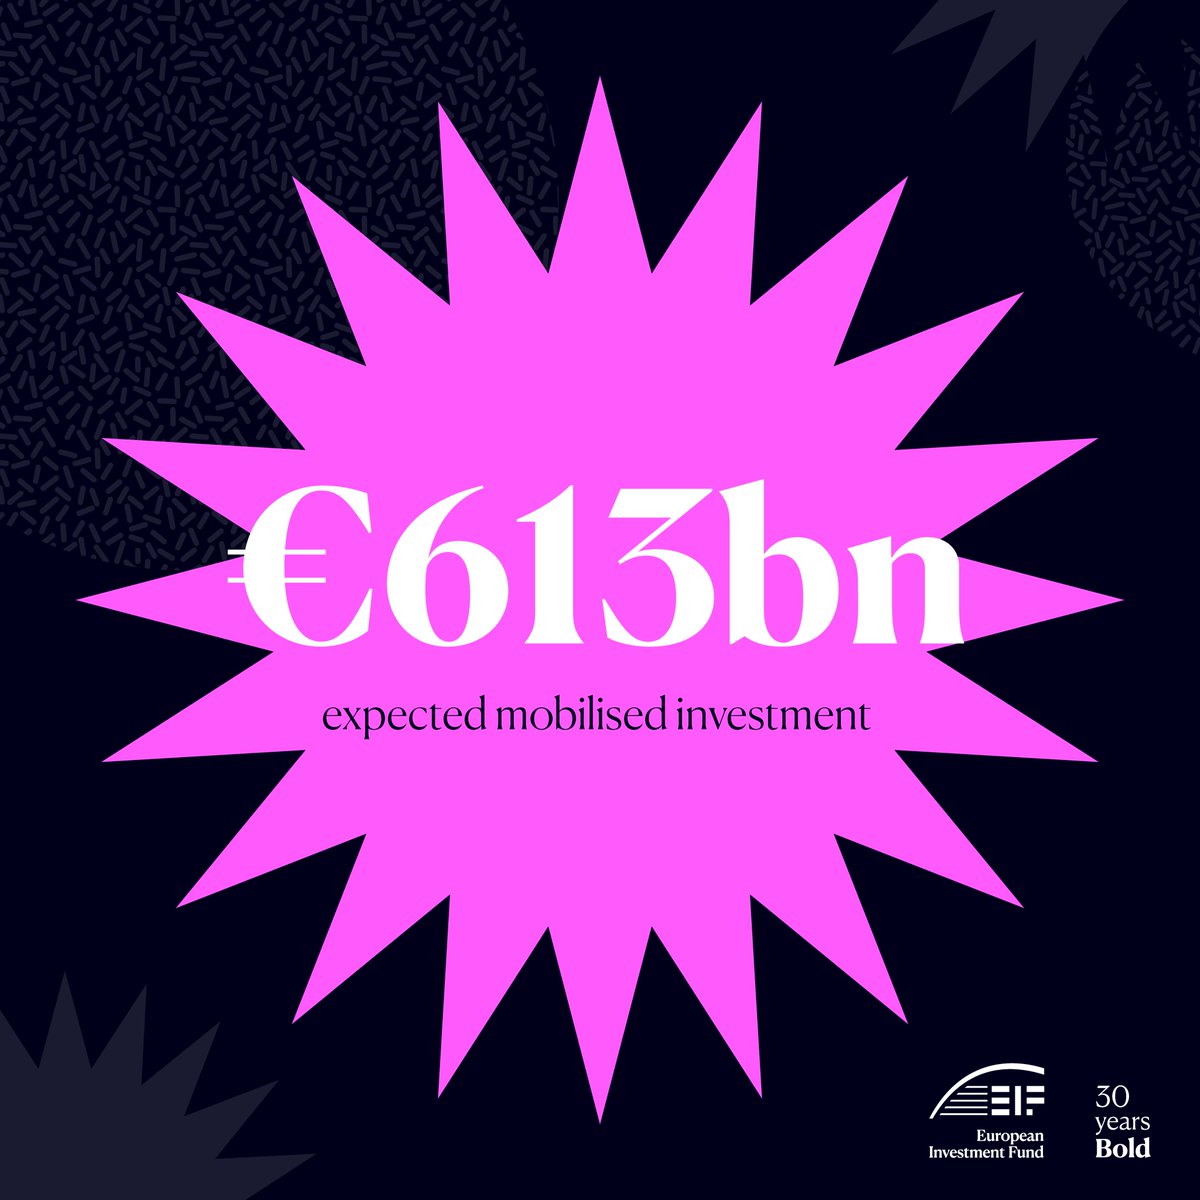 Connecting policy and finance & making private and public work together 🤝 This has been the EIF’s strength in the market for 30 years. Through the trust we’ve built and the partnerships we’ve forged, we are mobilising €613 bn of financing for European #SMEs.

#30yearsbold